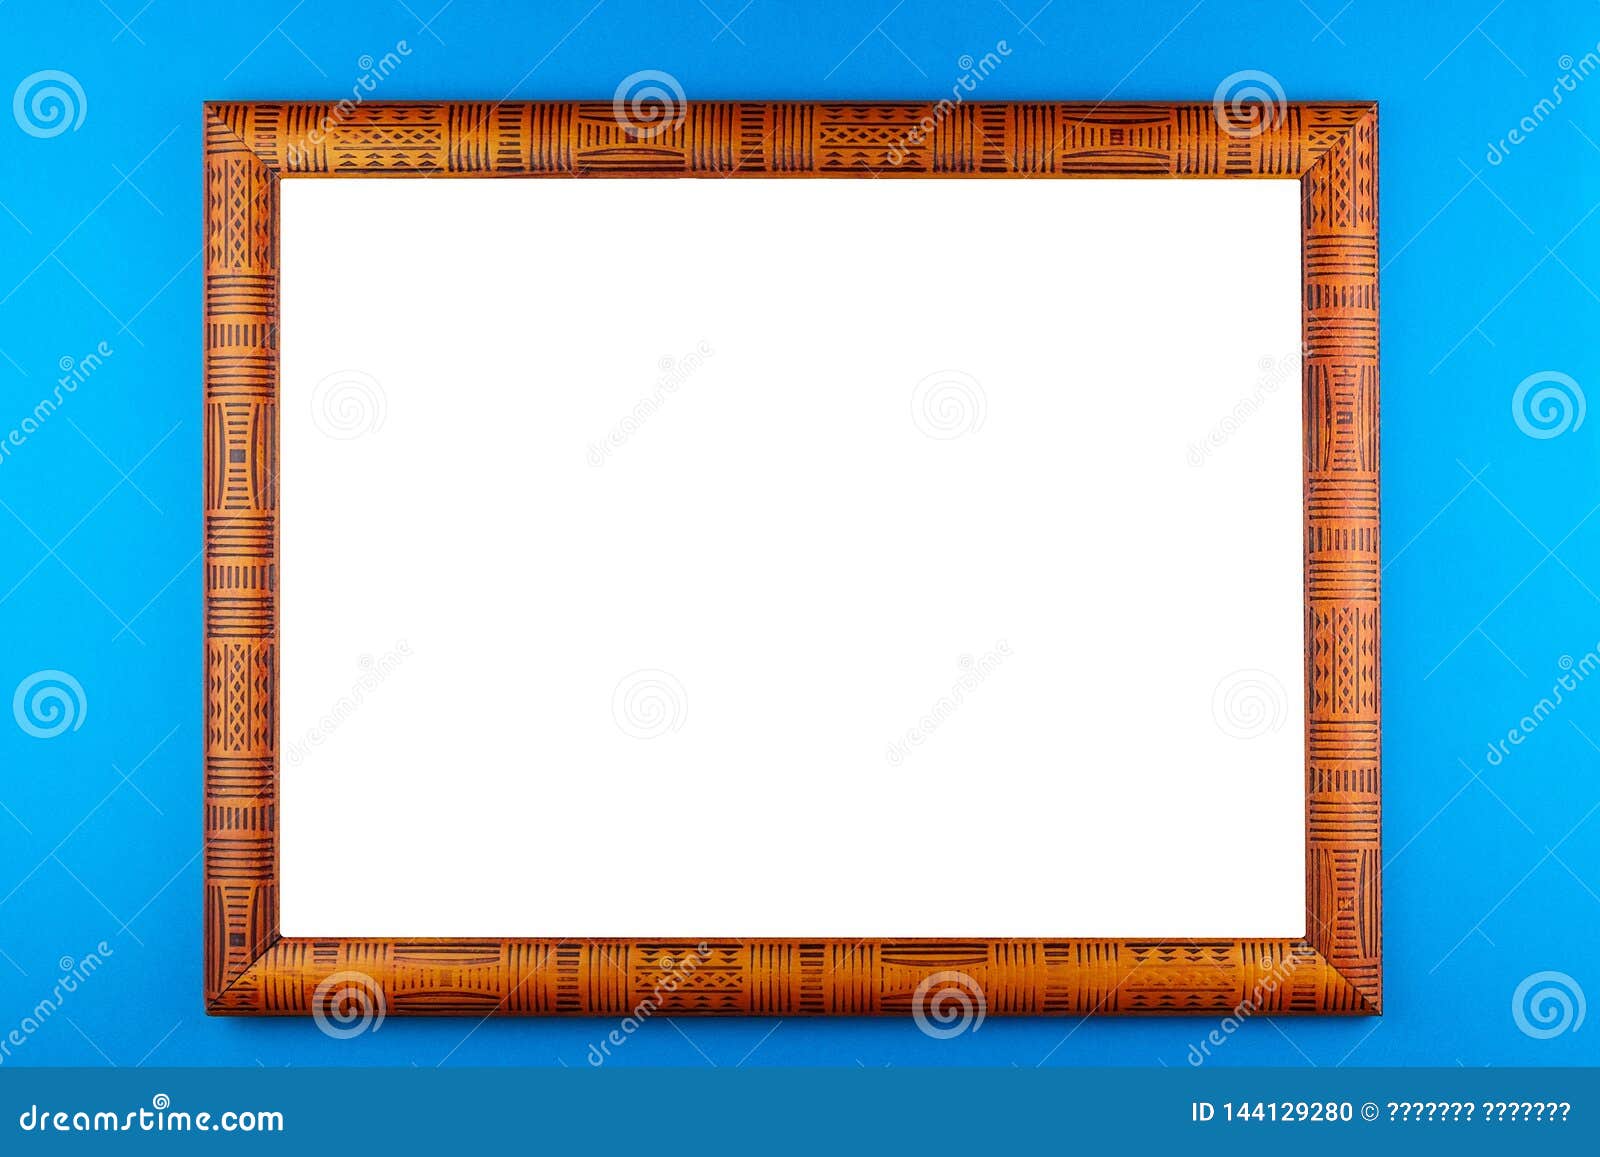 Wooden frame blue background. Wooden frame isolated on a blue background